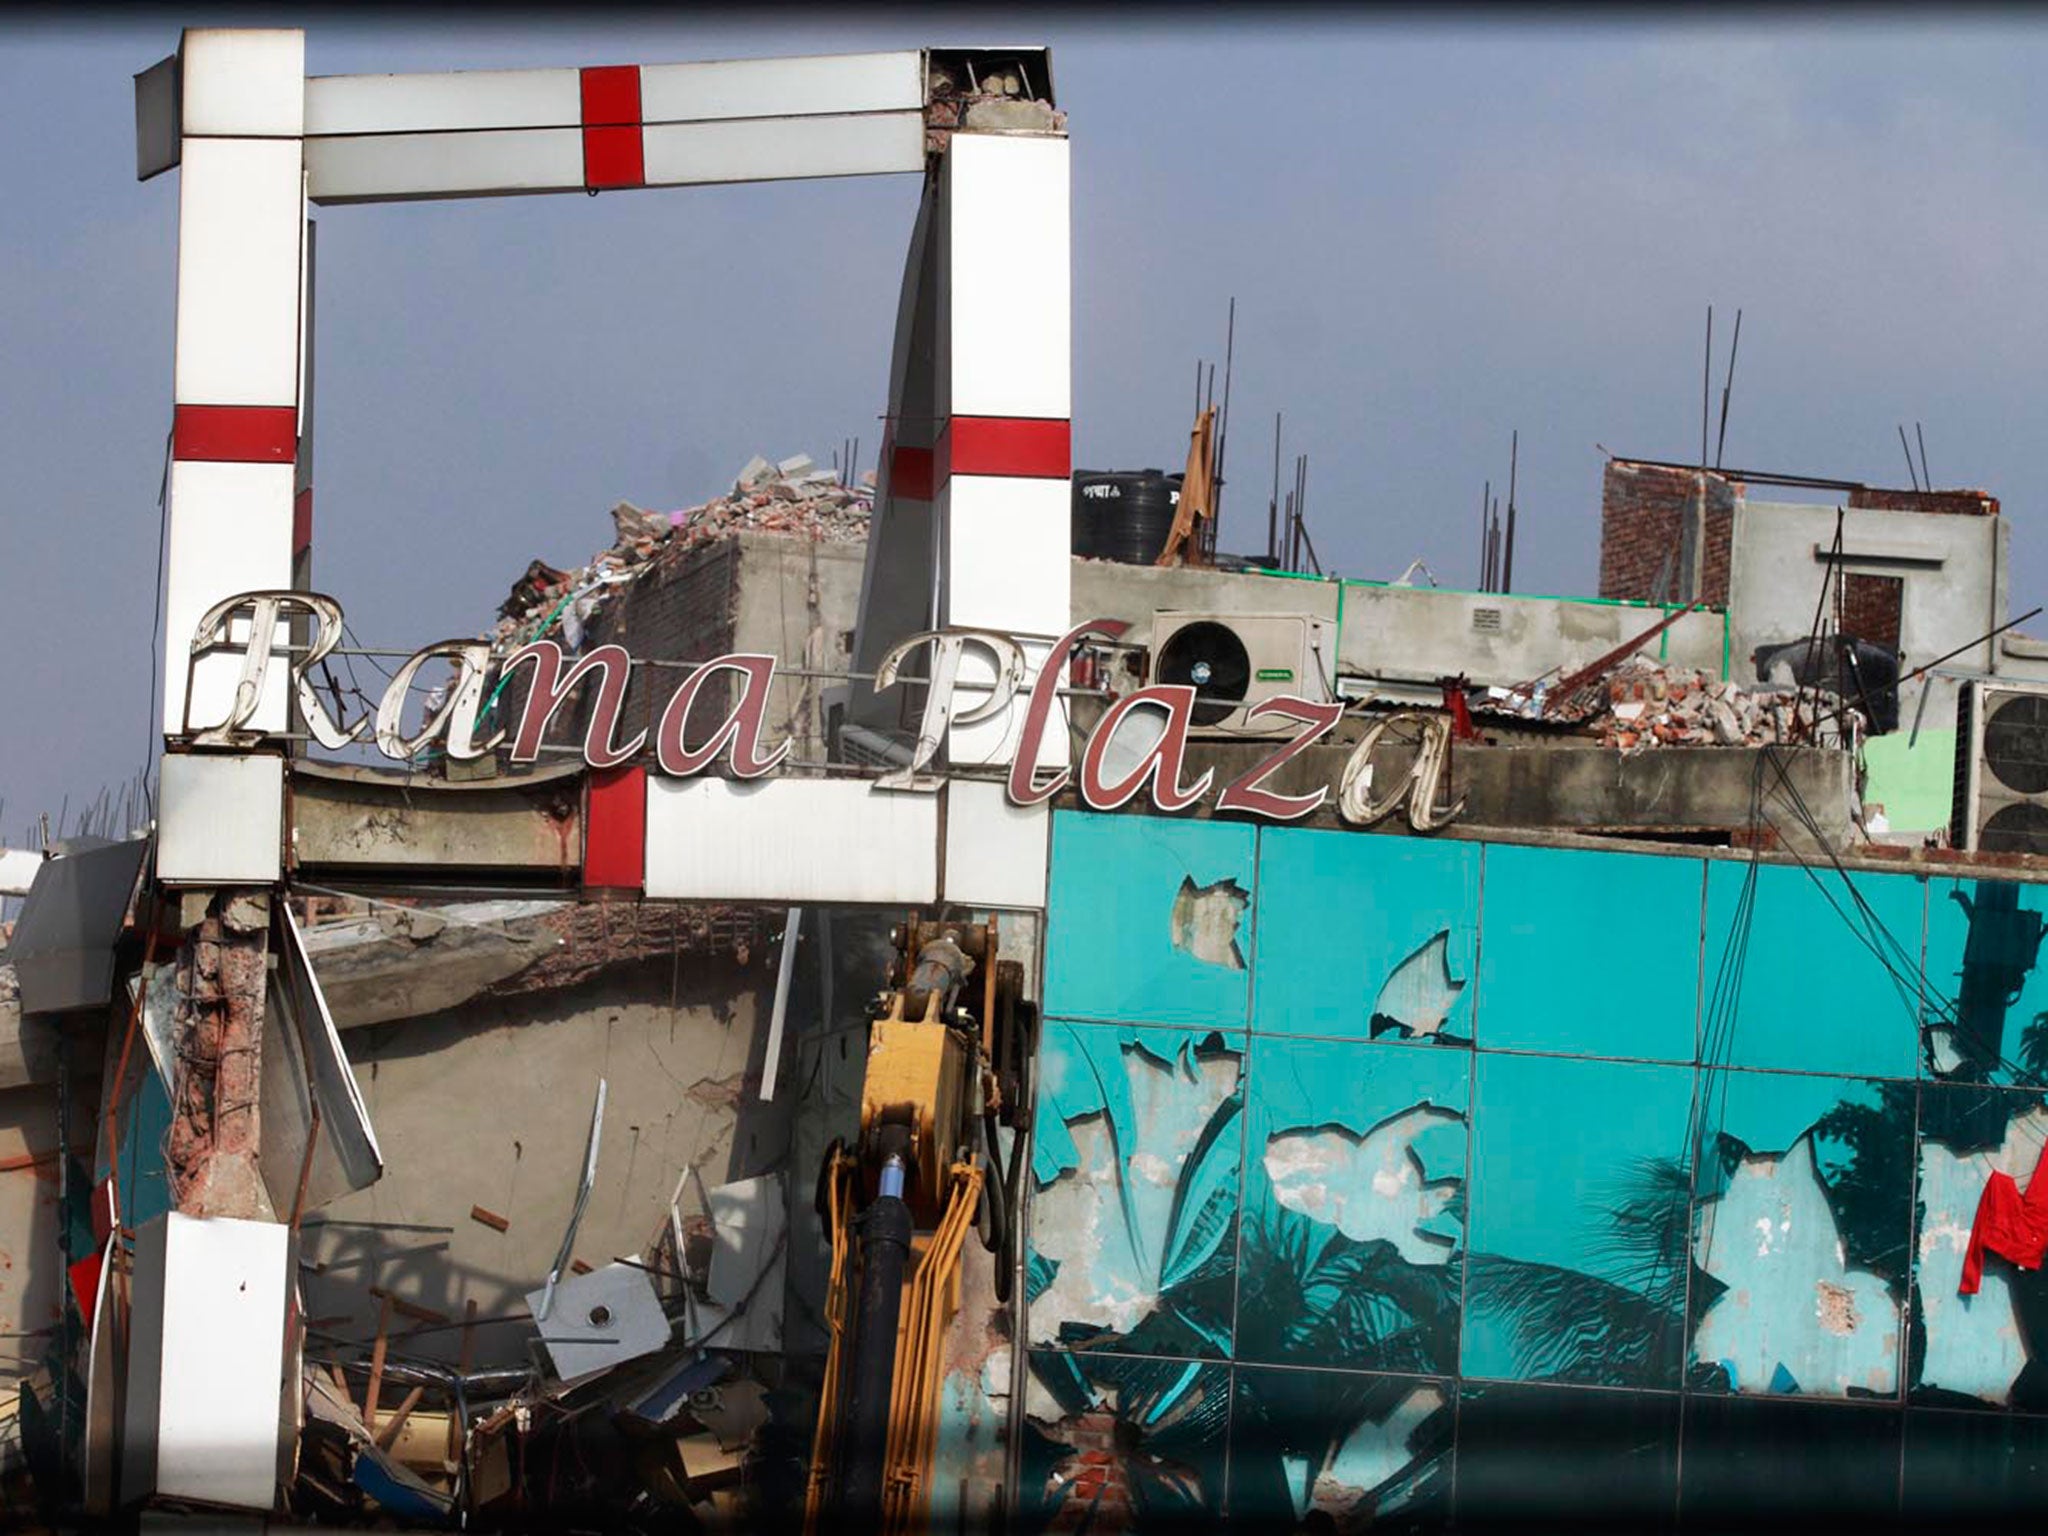 A signboard outside the factory reads “Rana Plaza” as it collapses on 24 April 2013